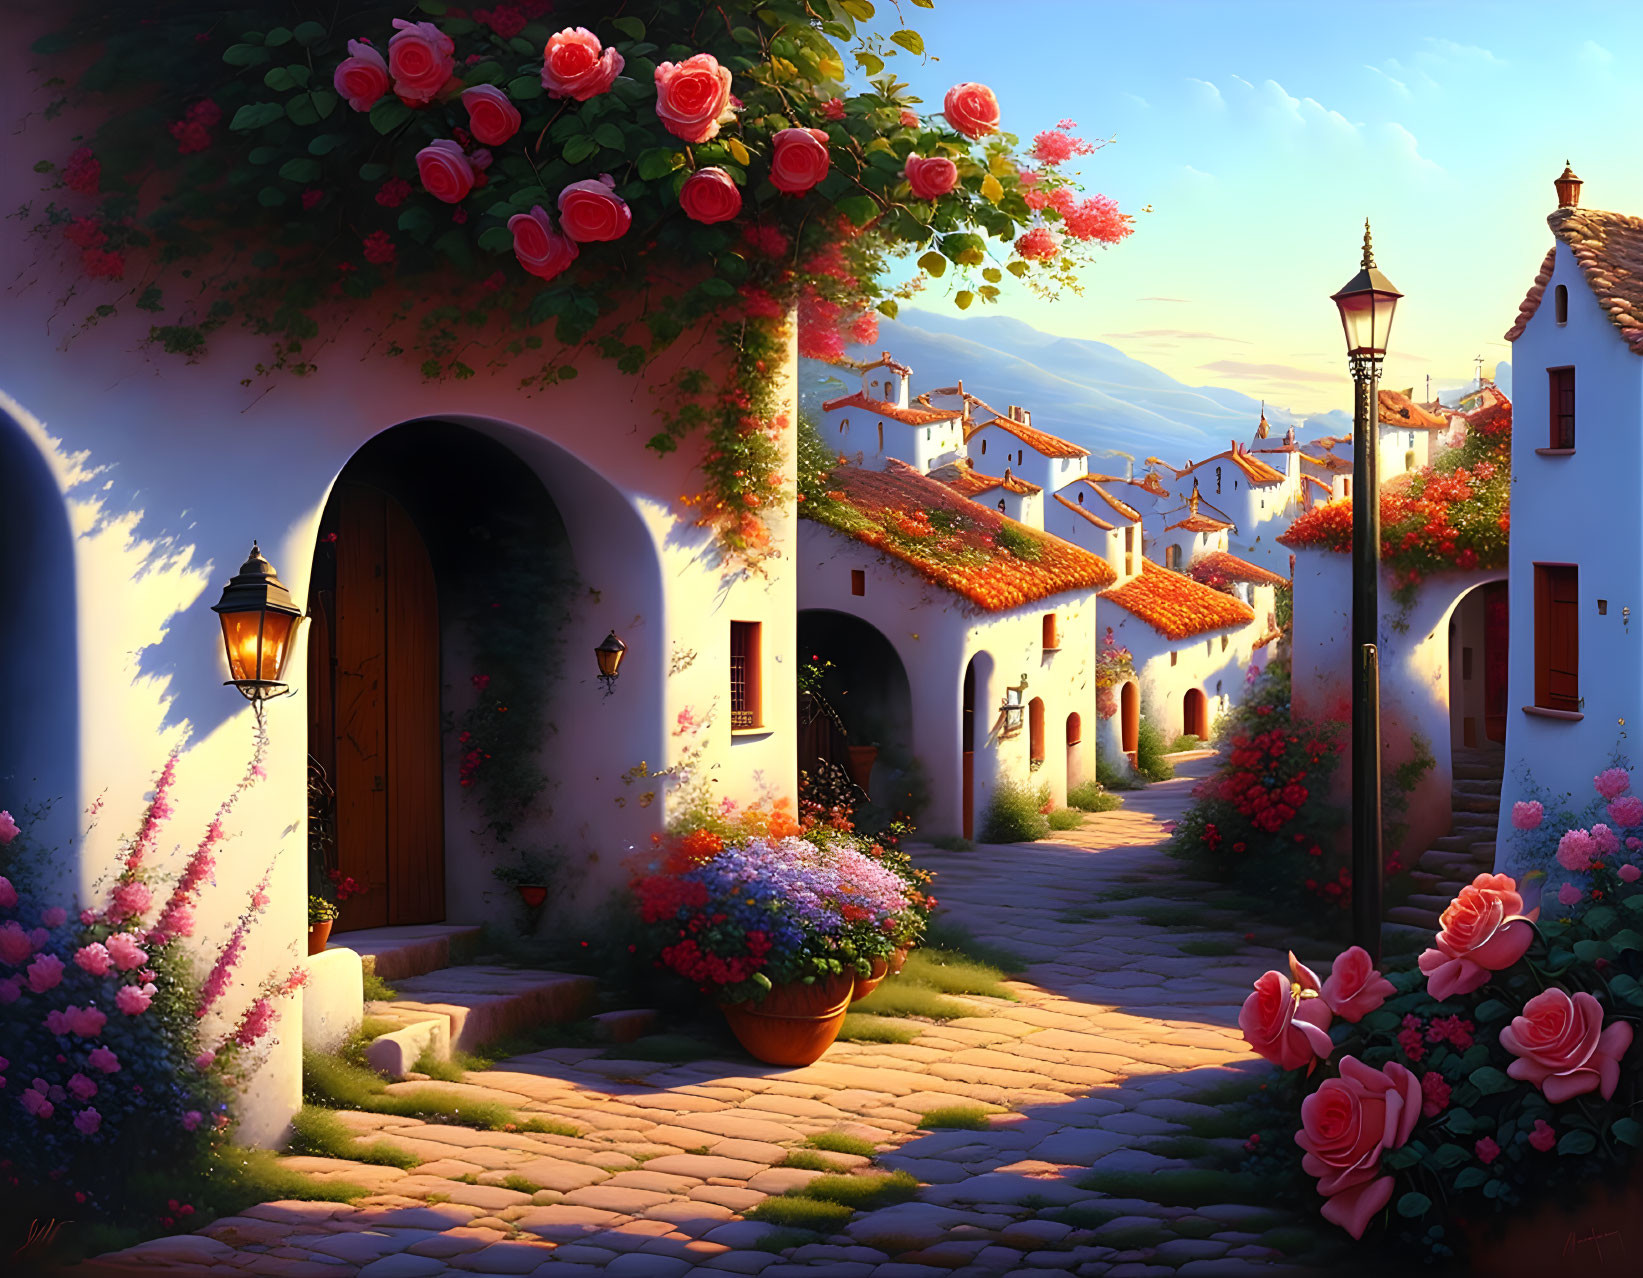 White houses, blooming flowers, cobblestone paths in a warm sunset scene